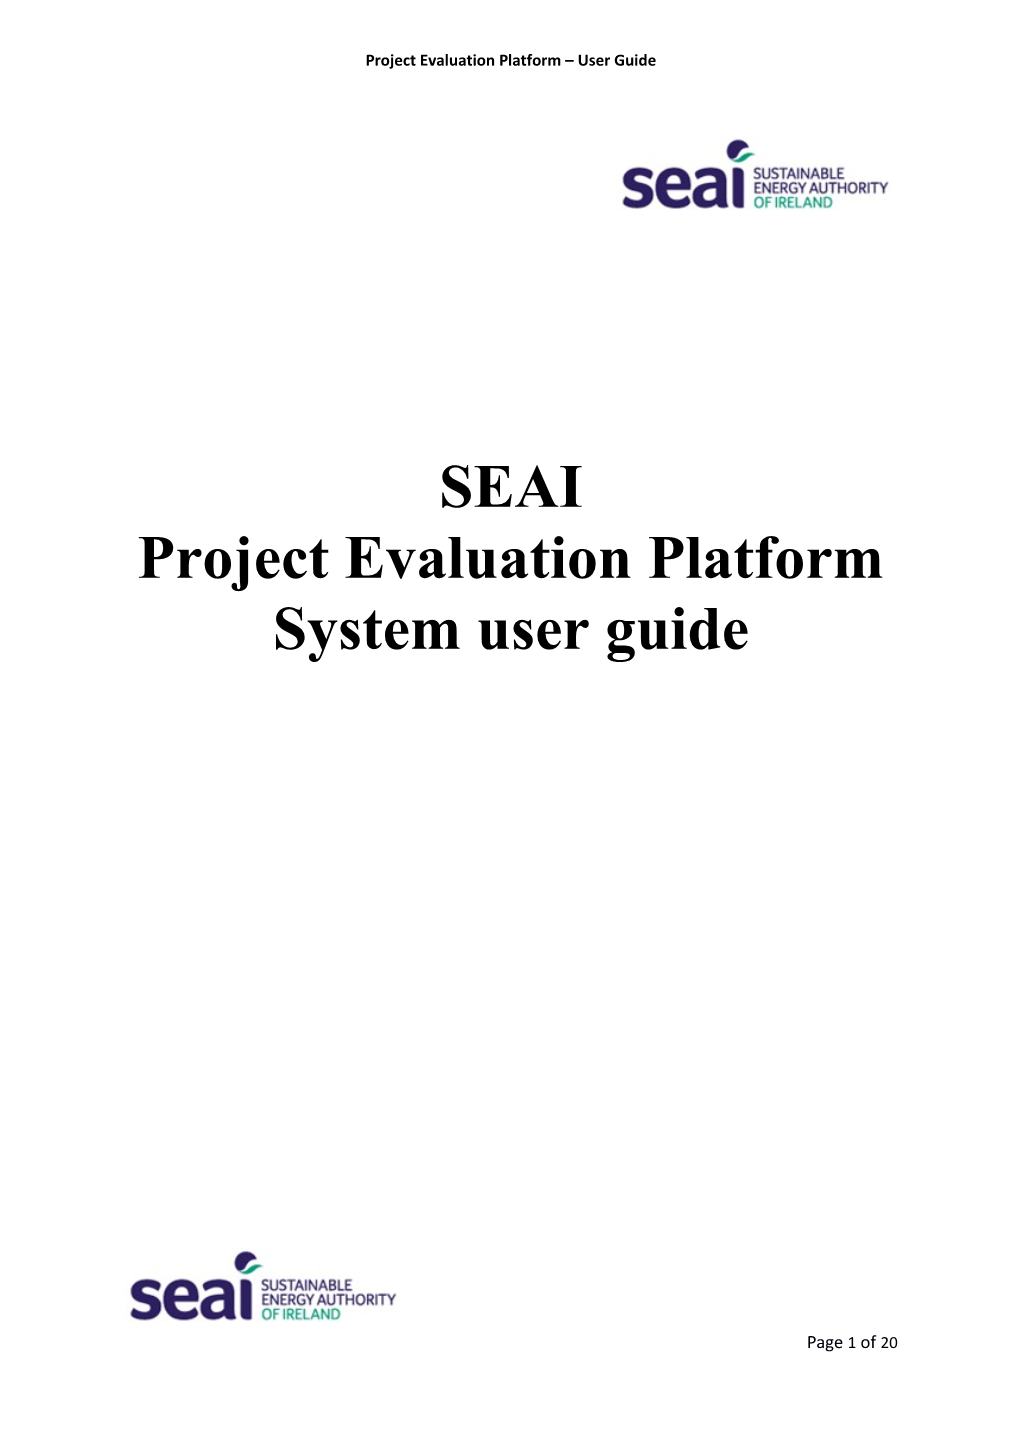 Accessing the Project Evaluation Platform